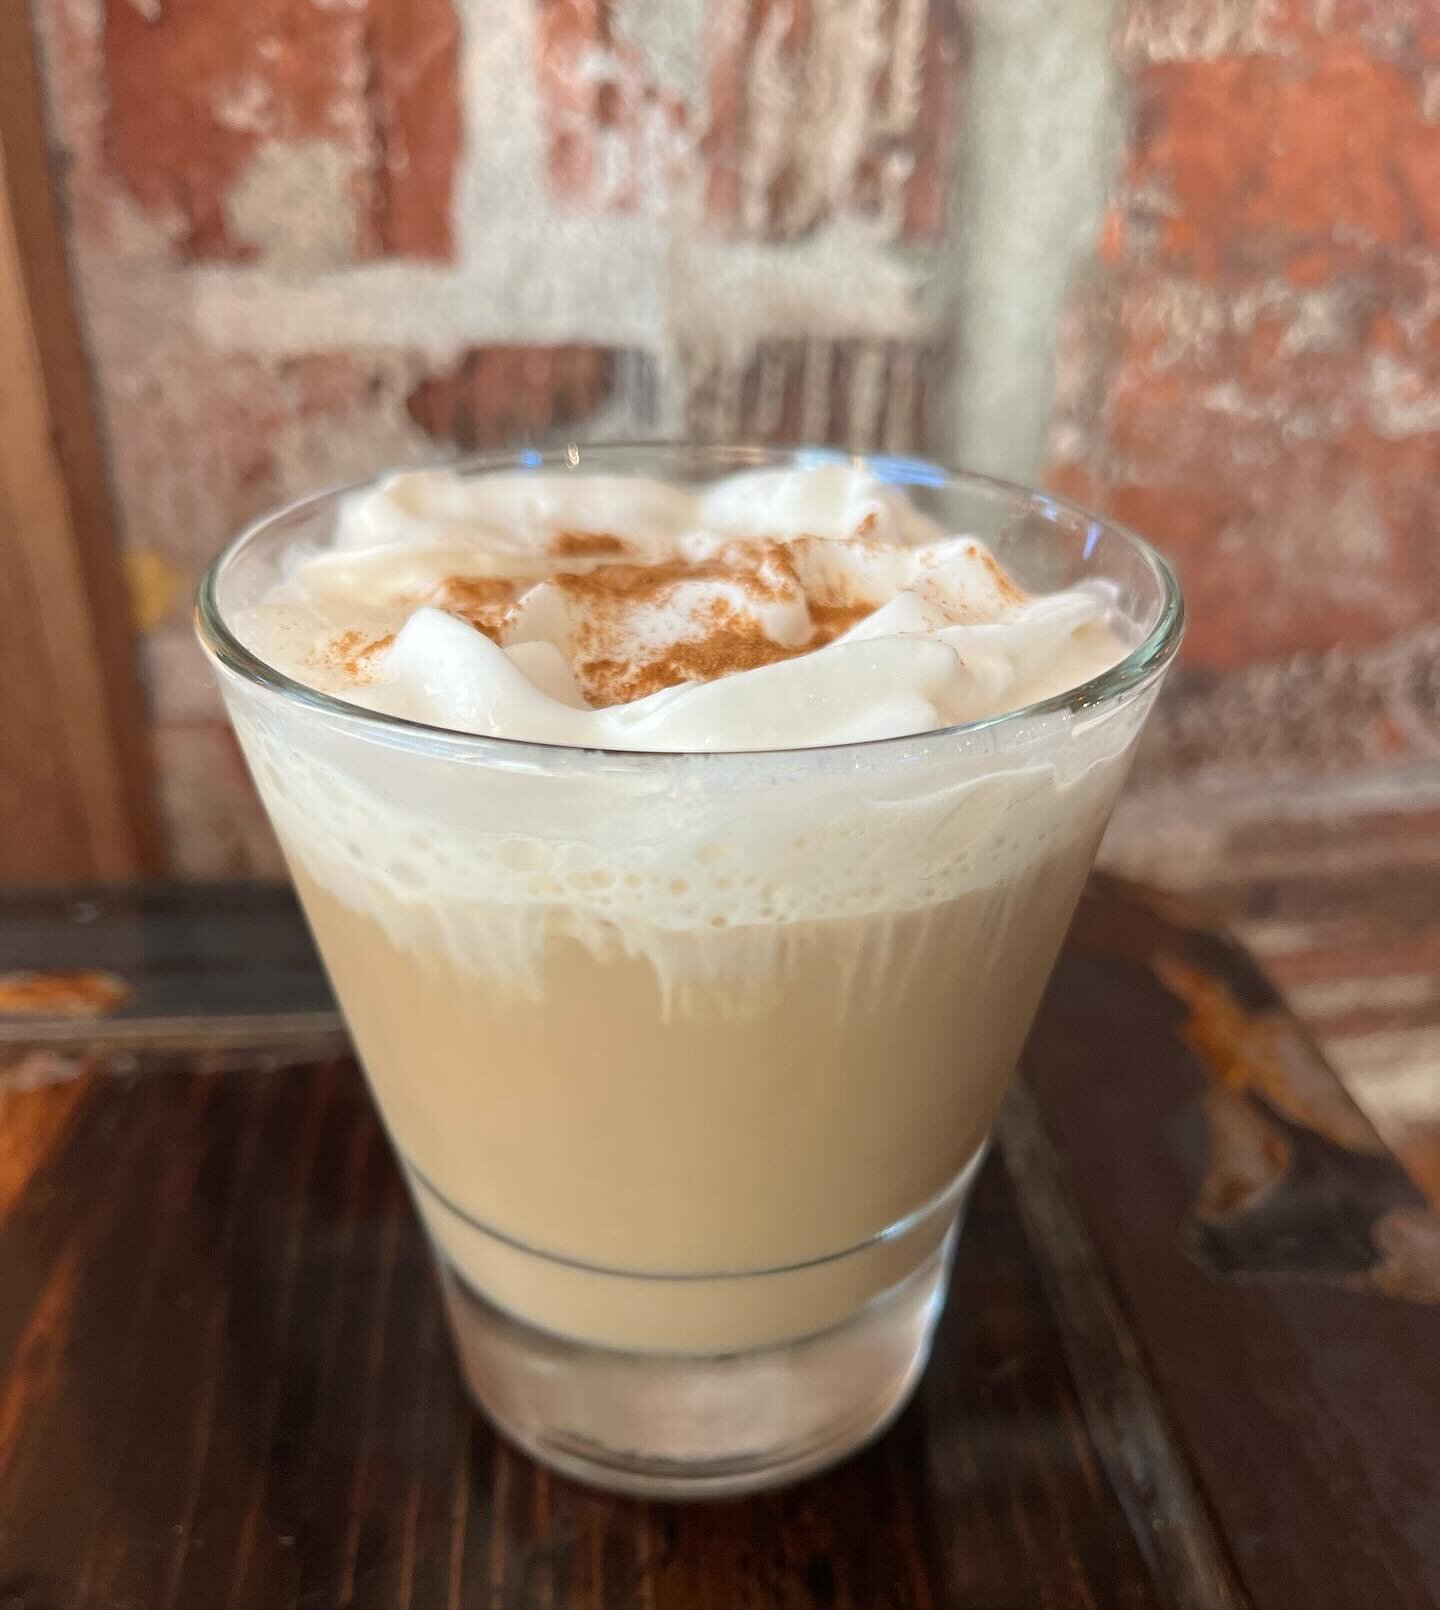 We&rsquo;ve got a new drink on the menu&hellip;Introducing the Noggy Toddy-tini! Sound Vanilla Vodka, Mr. Black Coffee Liqueur,  Cr&egrave;me De Cocoa, egg nog, and toddy cold brew&mdash;shaken and strained, topped with whipped cream &amp; cinnamon.